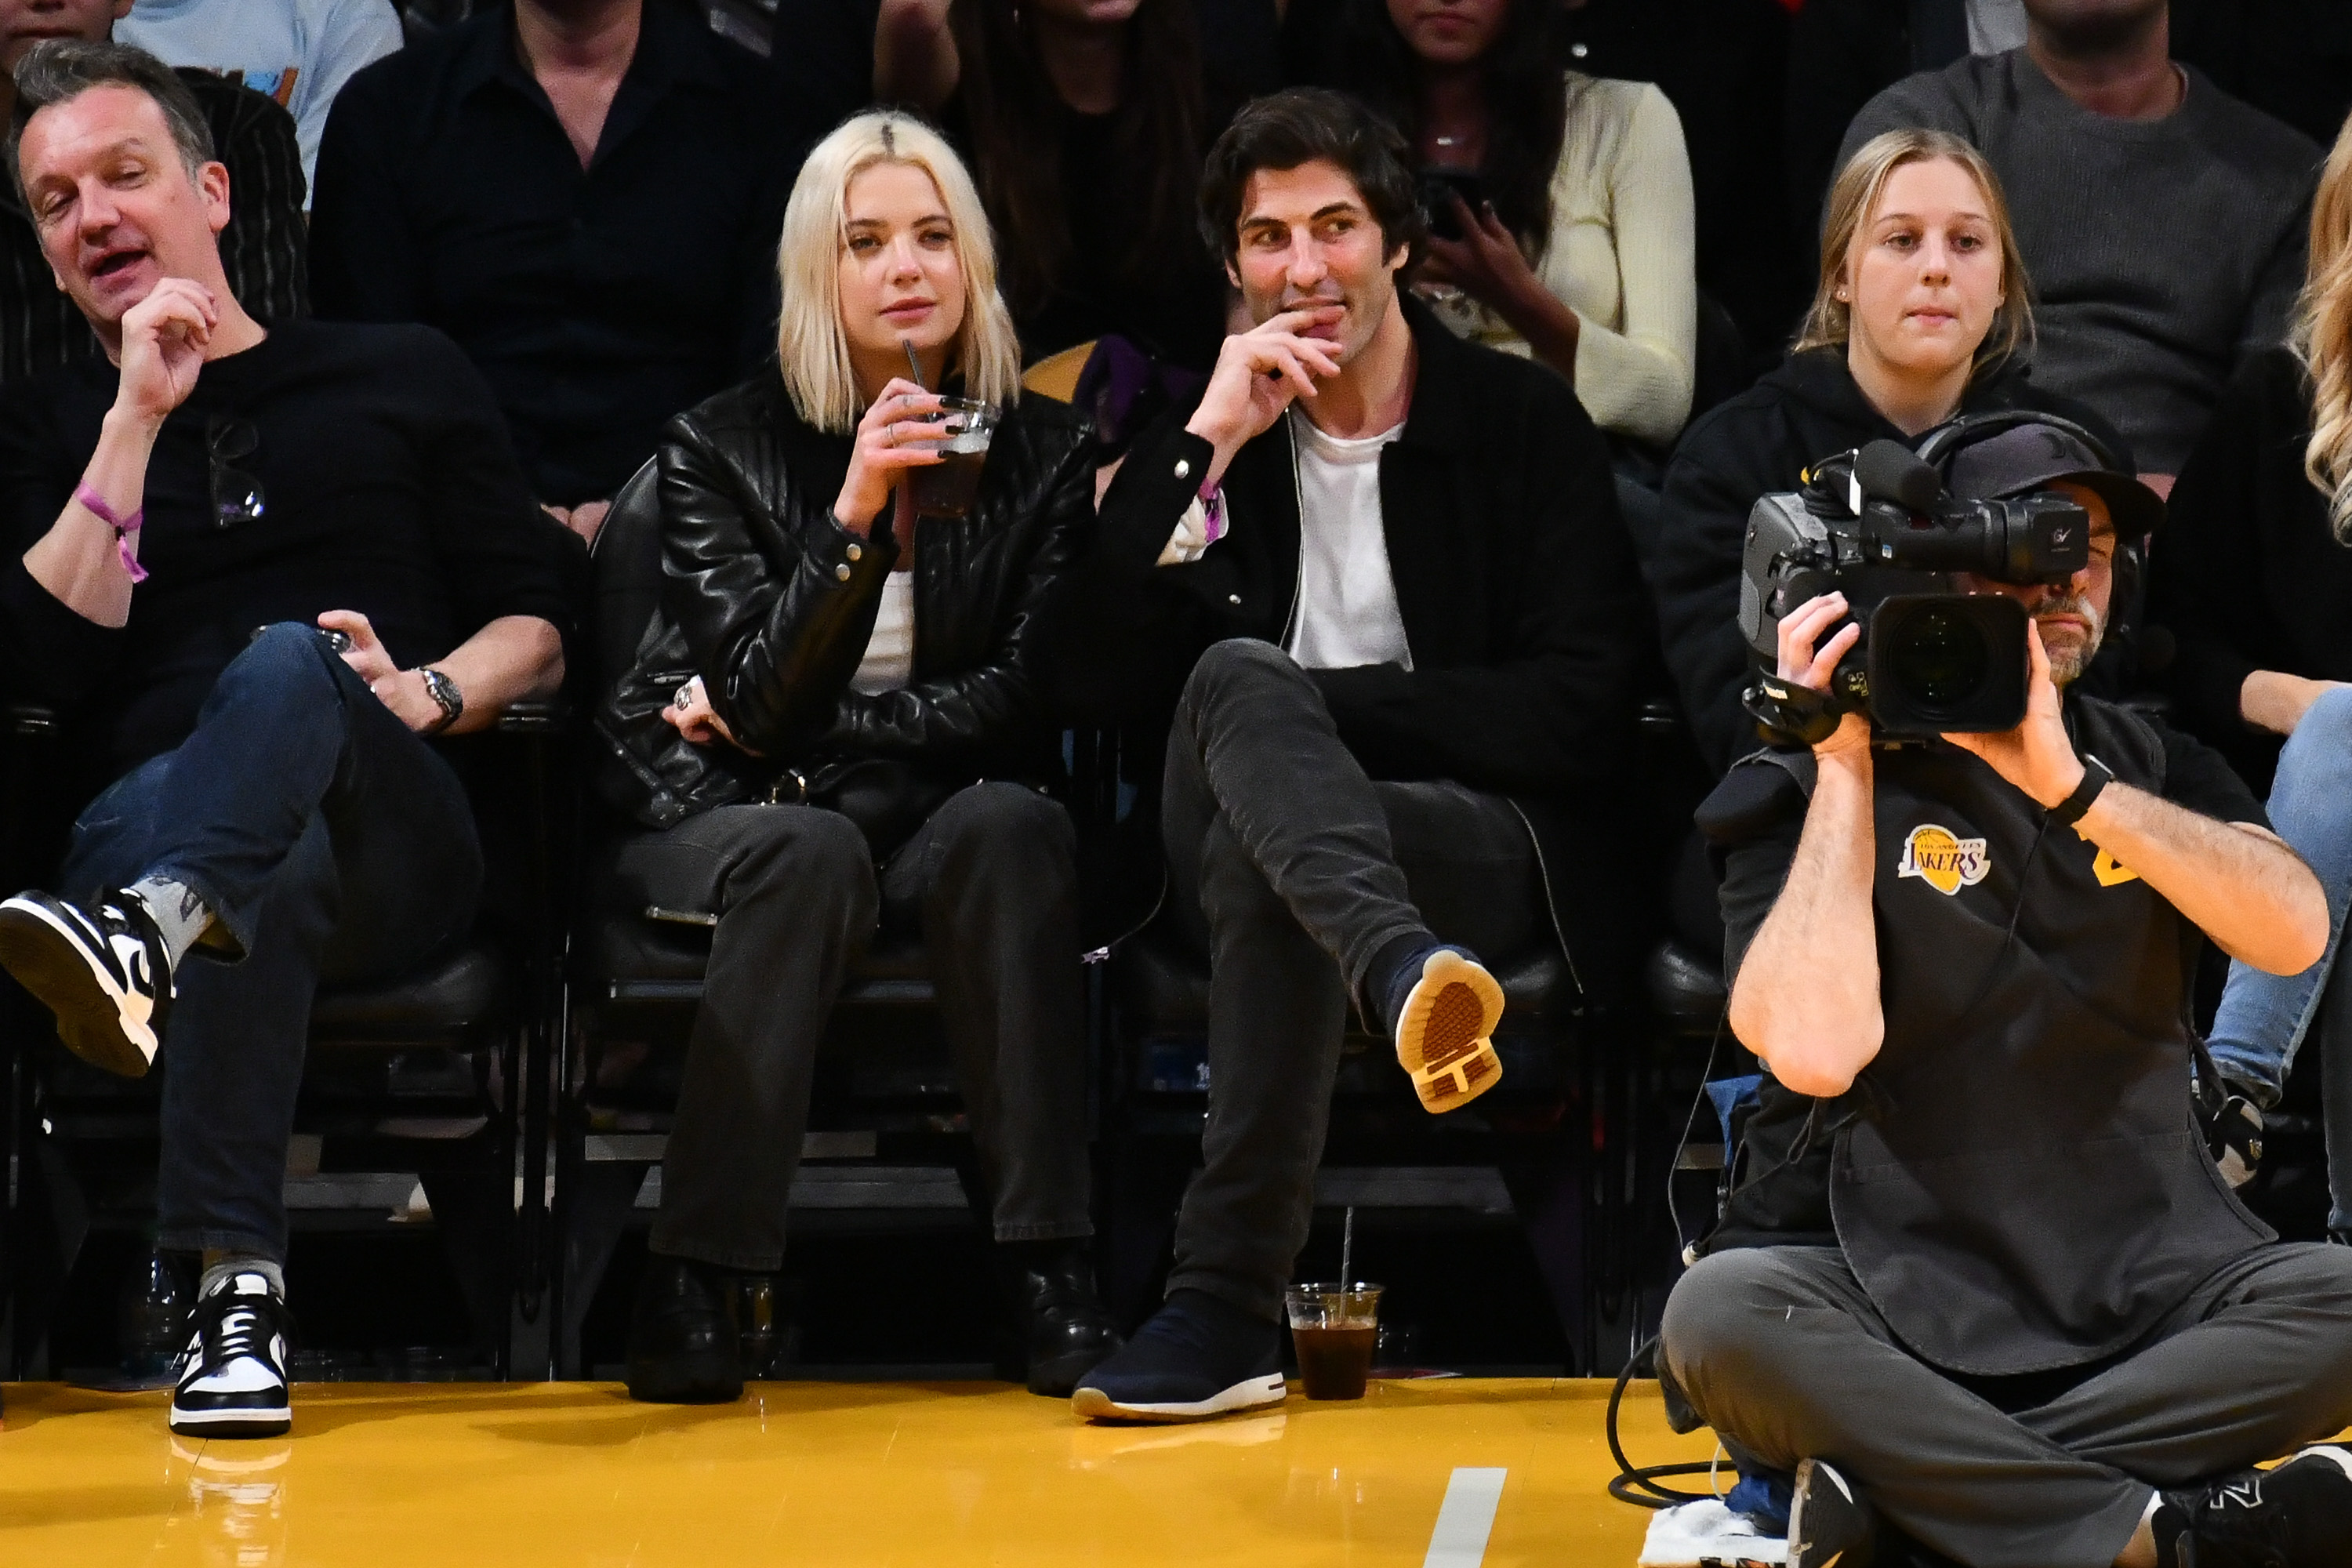 Ashley Benson and Brandon Davis attend a basketball game between the Los Angeles Lakers and the Miami Heat at Crypto.com Arena on January 4, 2023 in Los Angeles, California. | Source: Getty Images